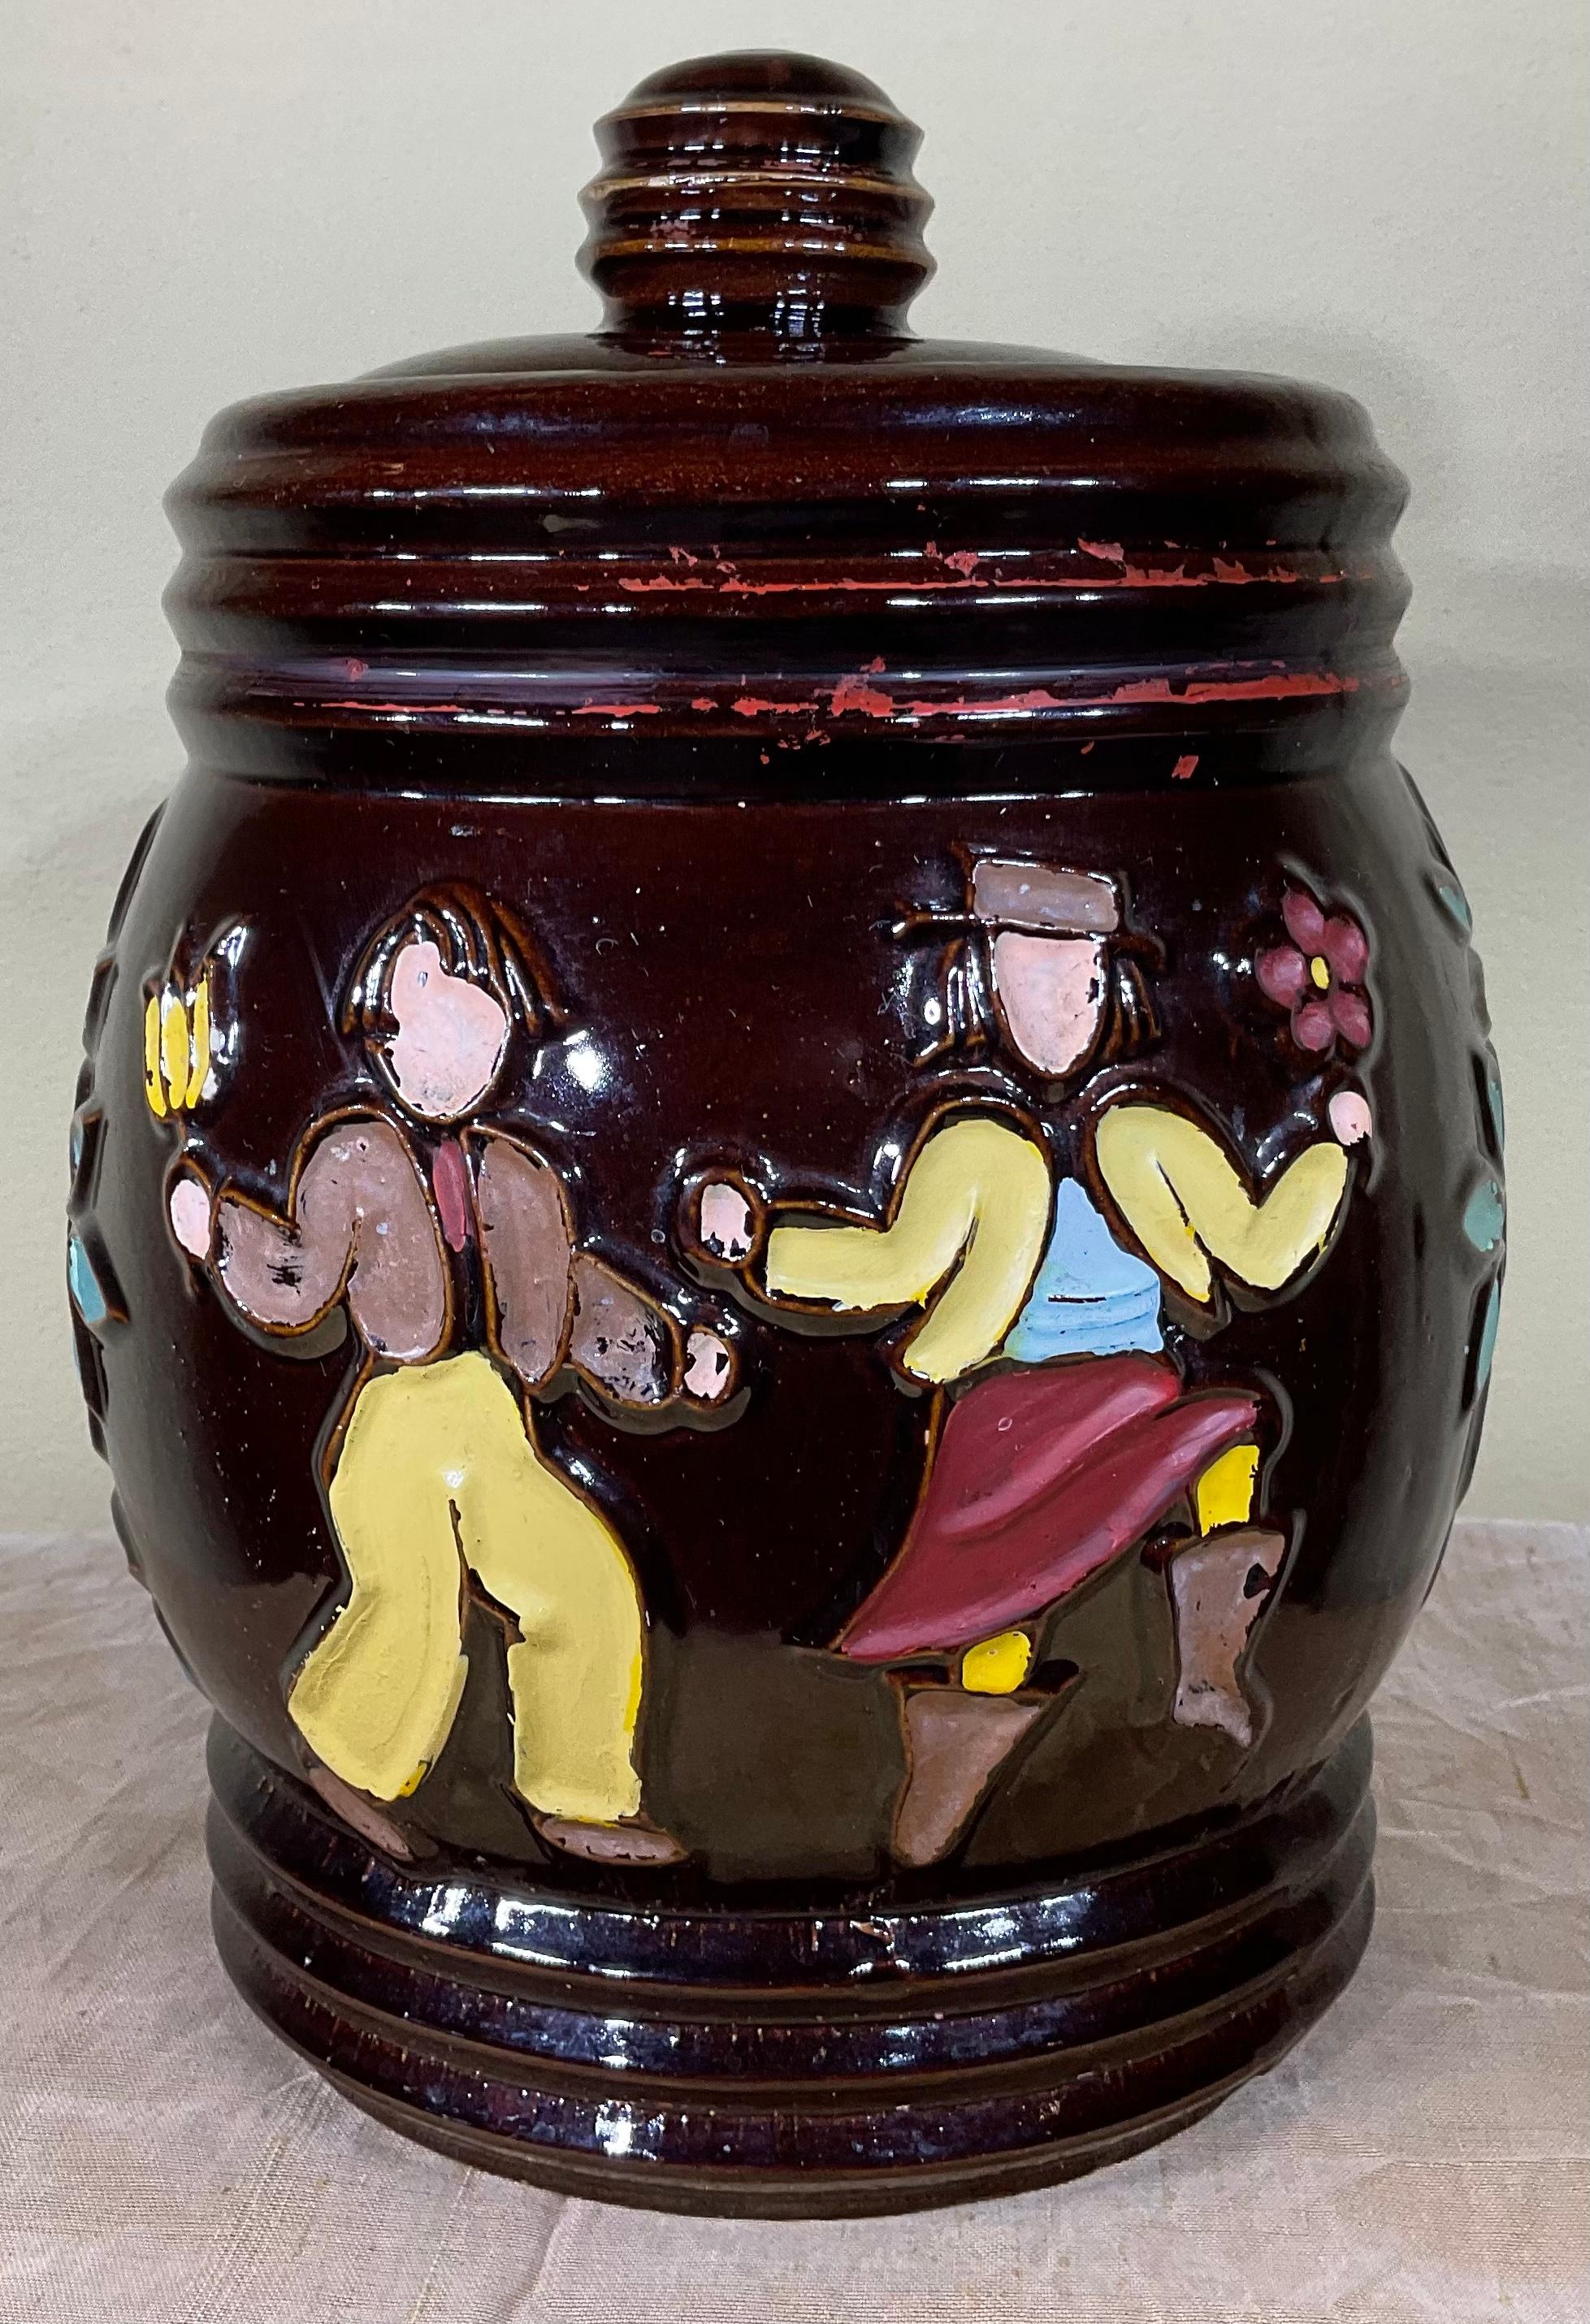 Lovely cookie jar made of ceramic hand-painted, solid ceramic decorative work.